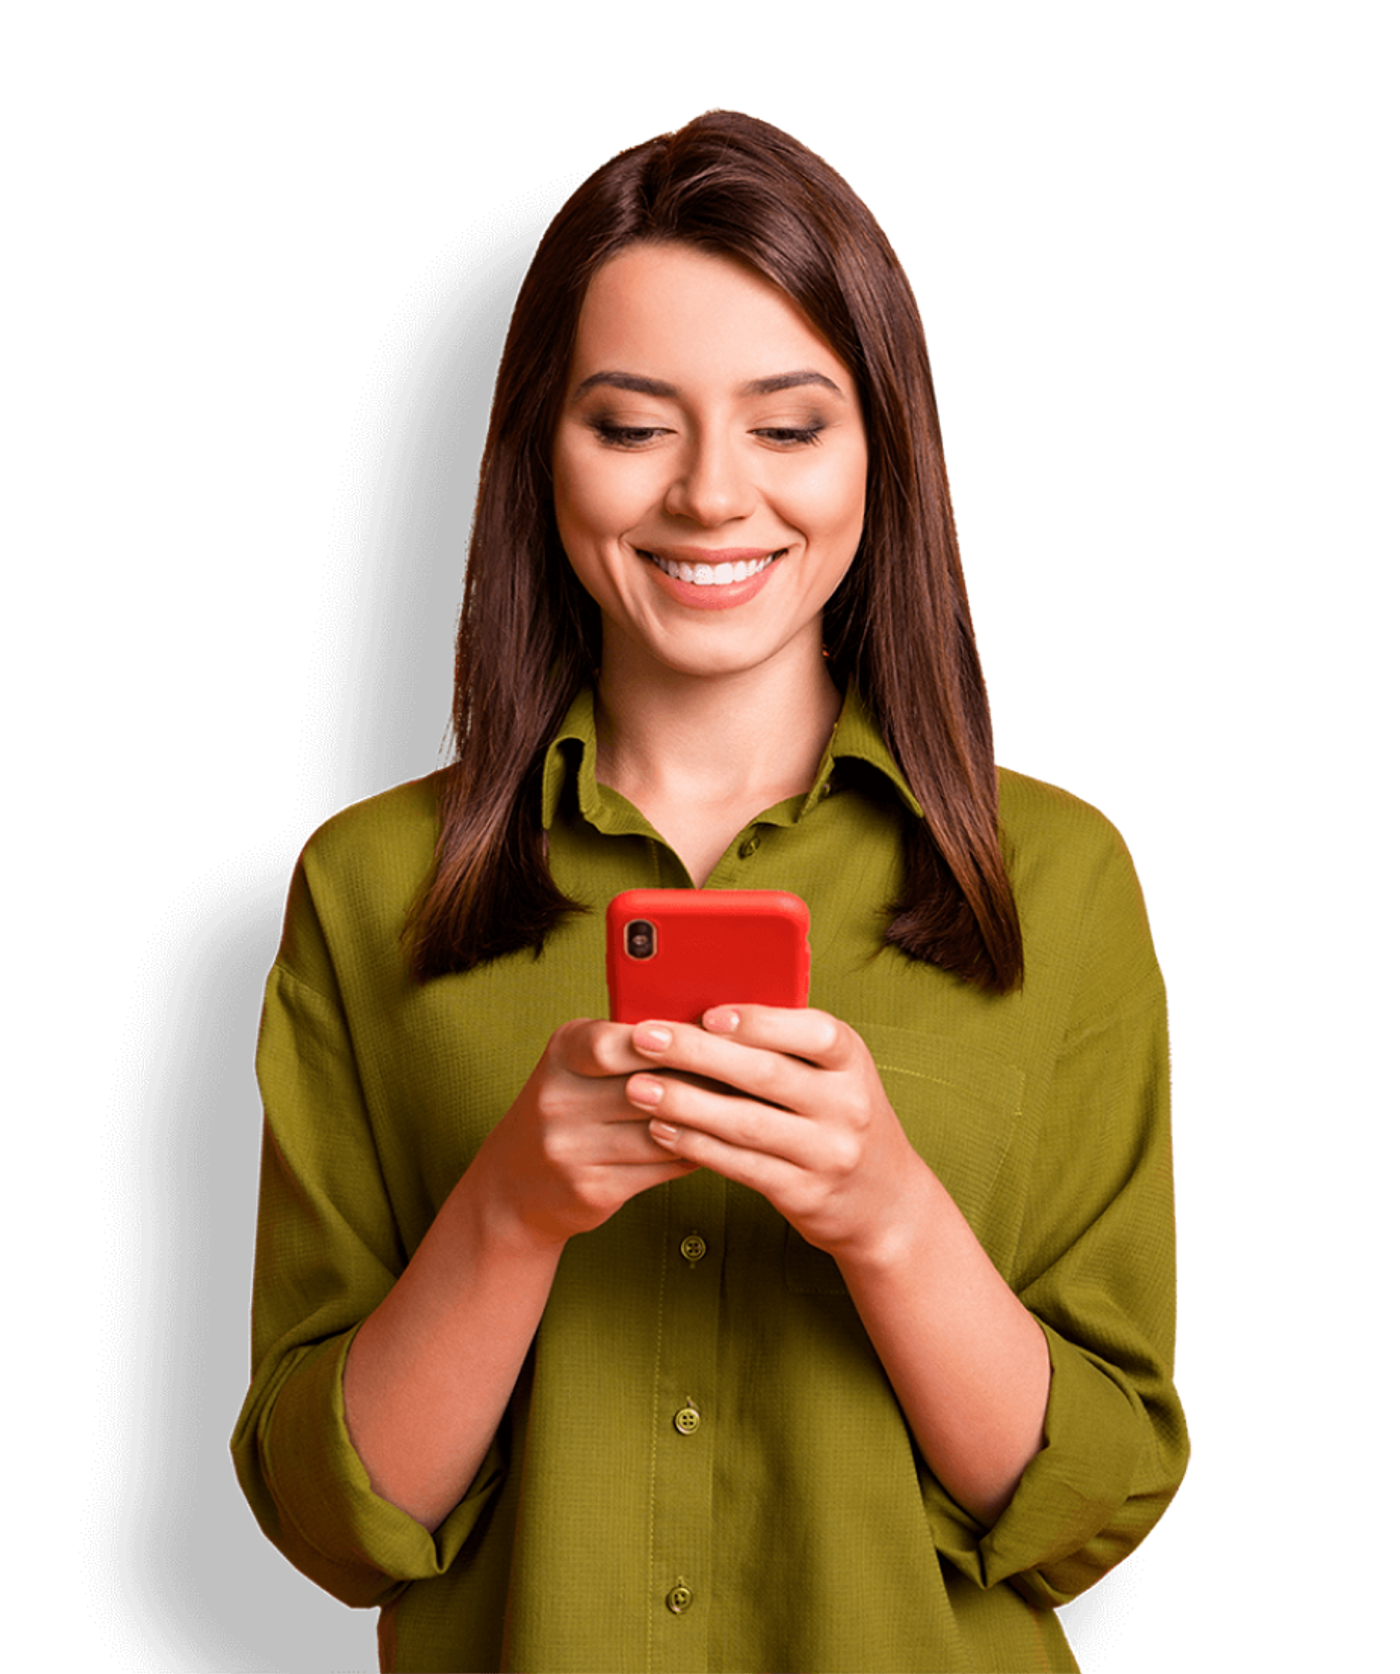 Woman in green shirt looking at a mobile phone